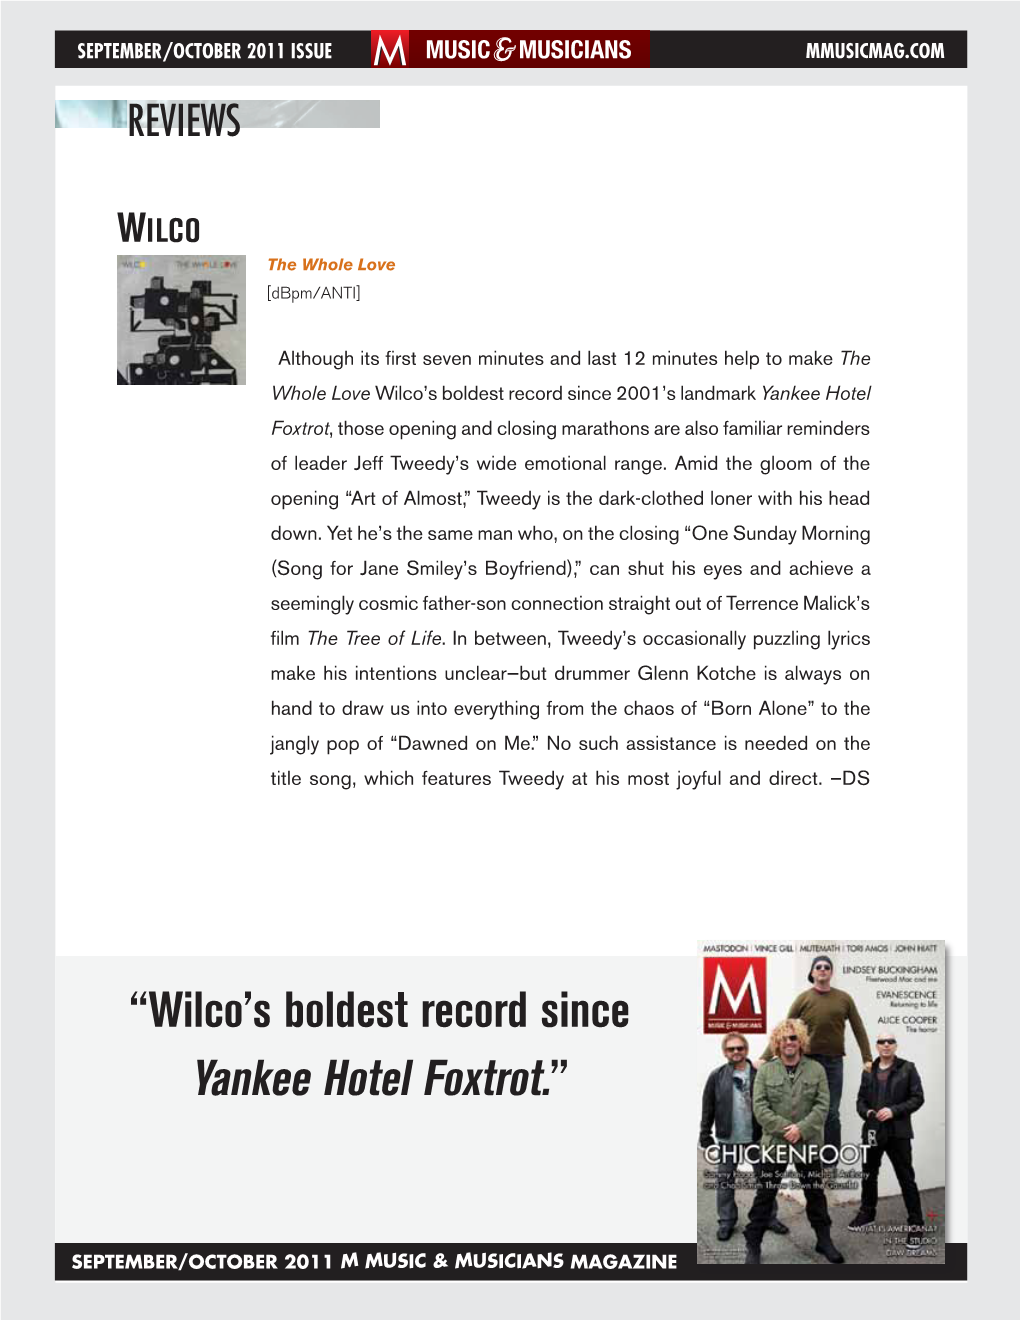 “Wilco's Boldest Record Since Yankee Hotel Foxtrot.”